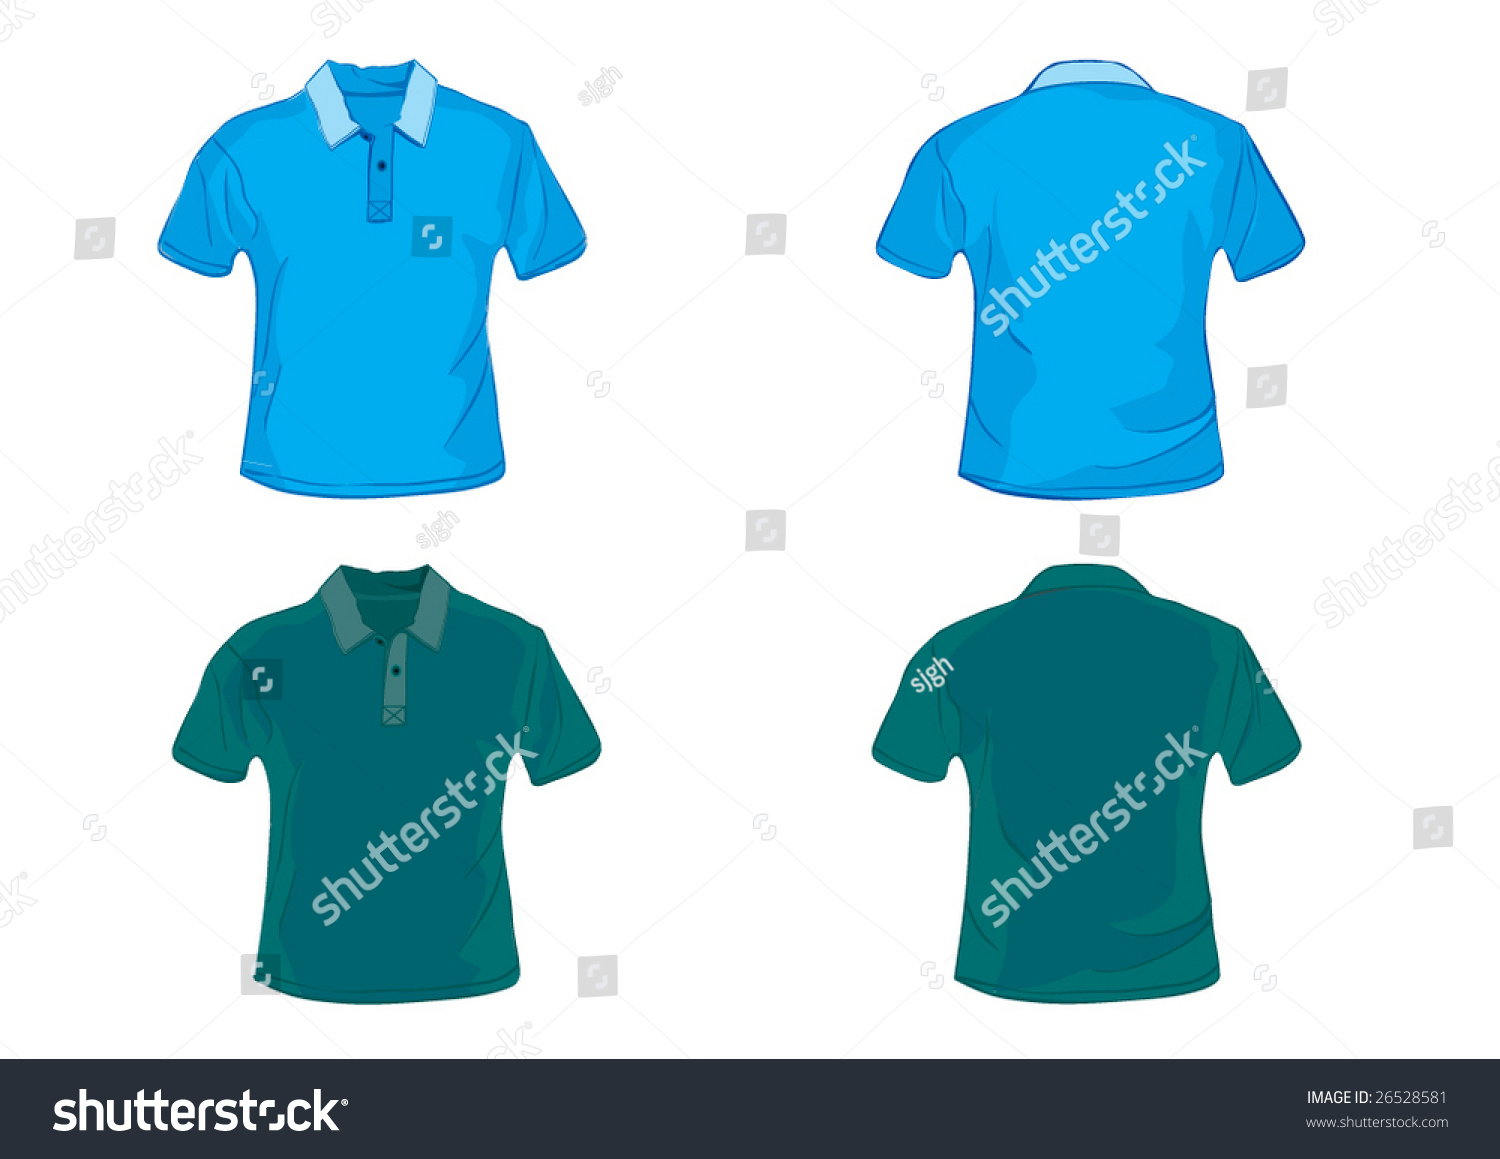 Blue And Green Polo Shirt Design Template With Front And Back. Stock Vector Illustration ...